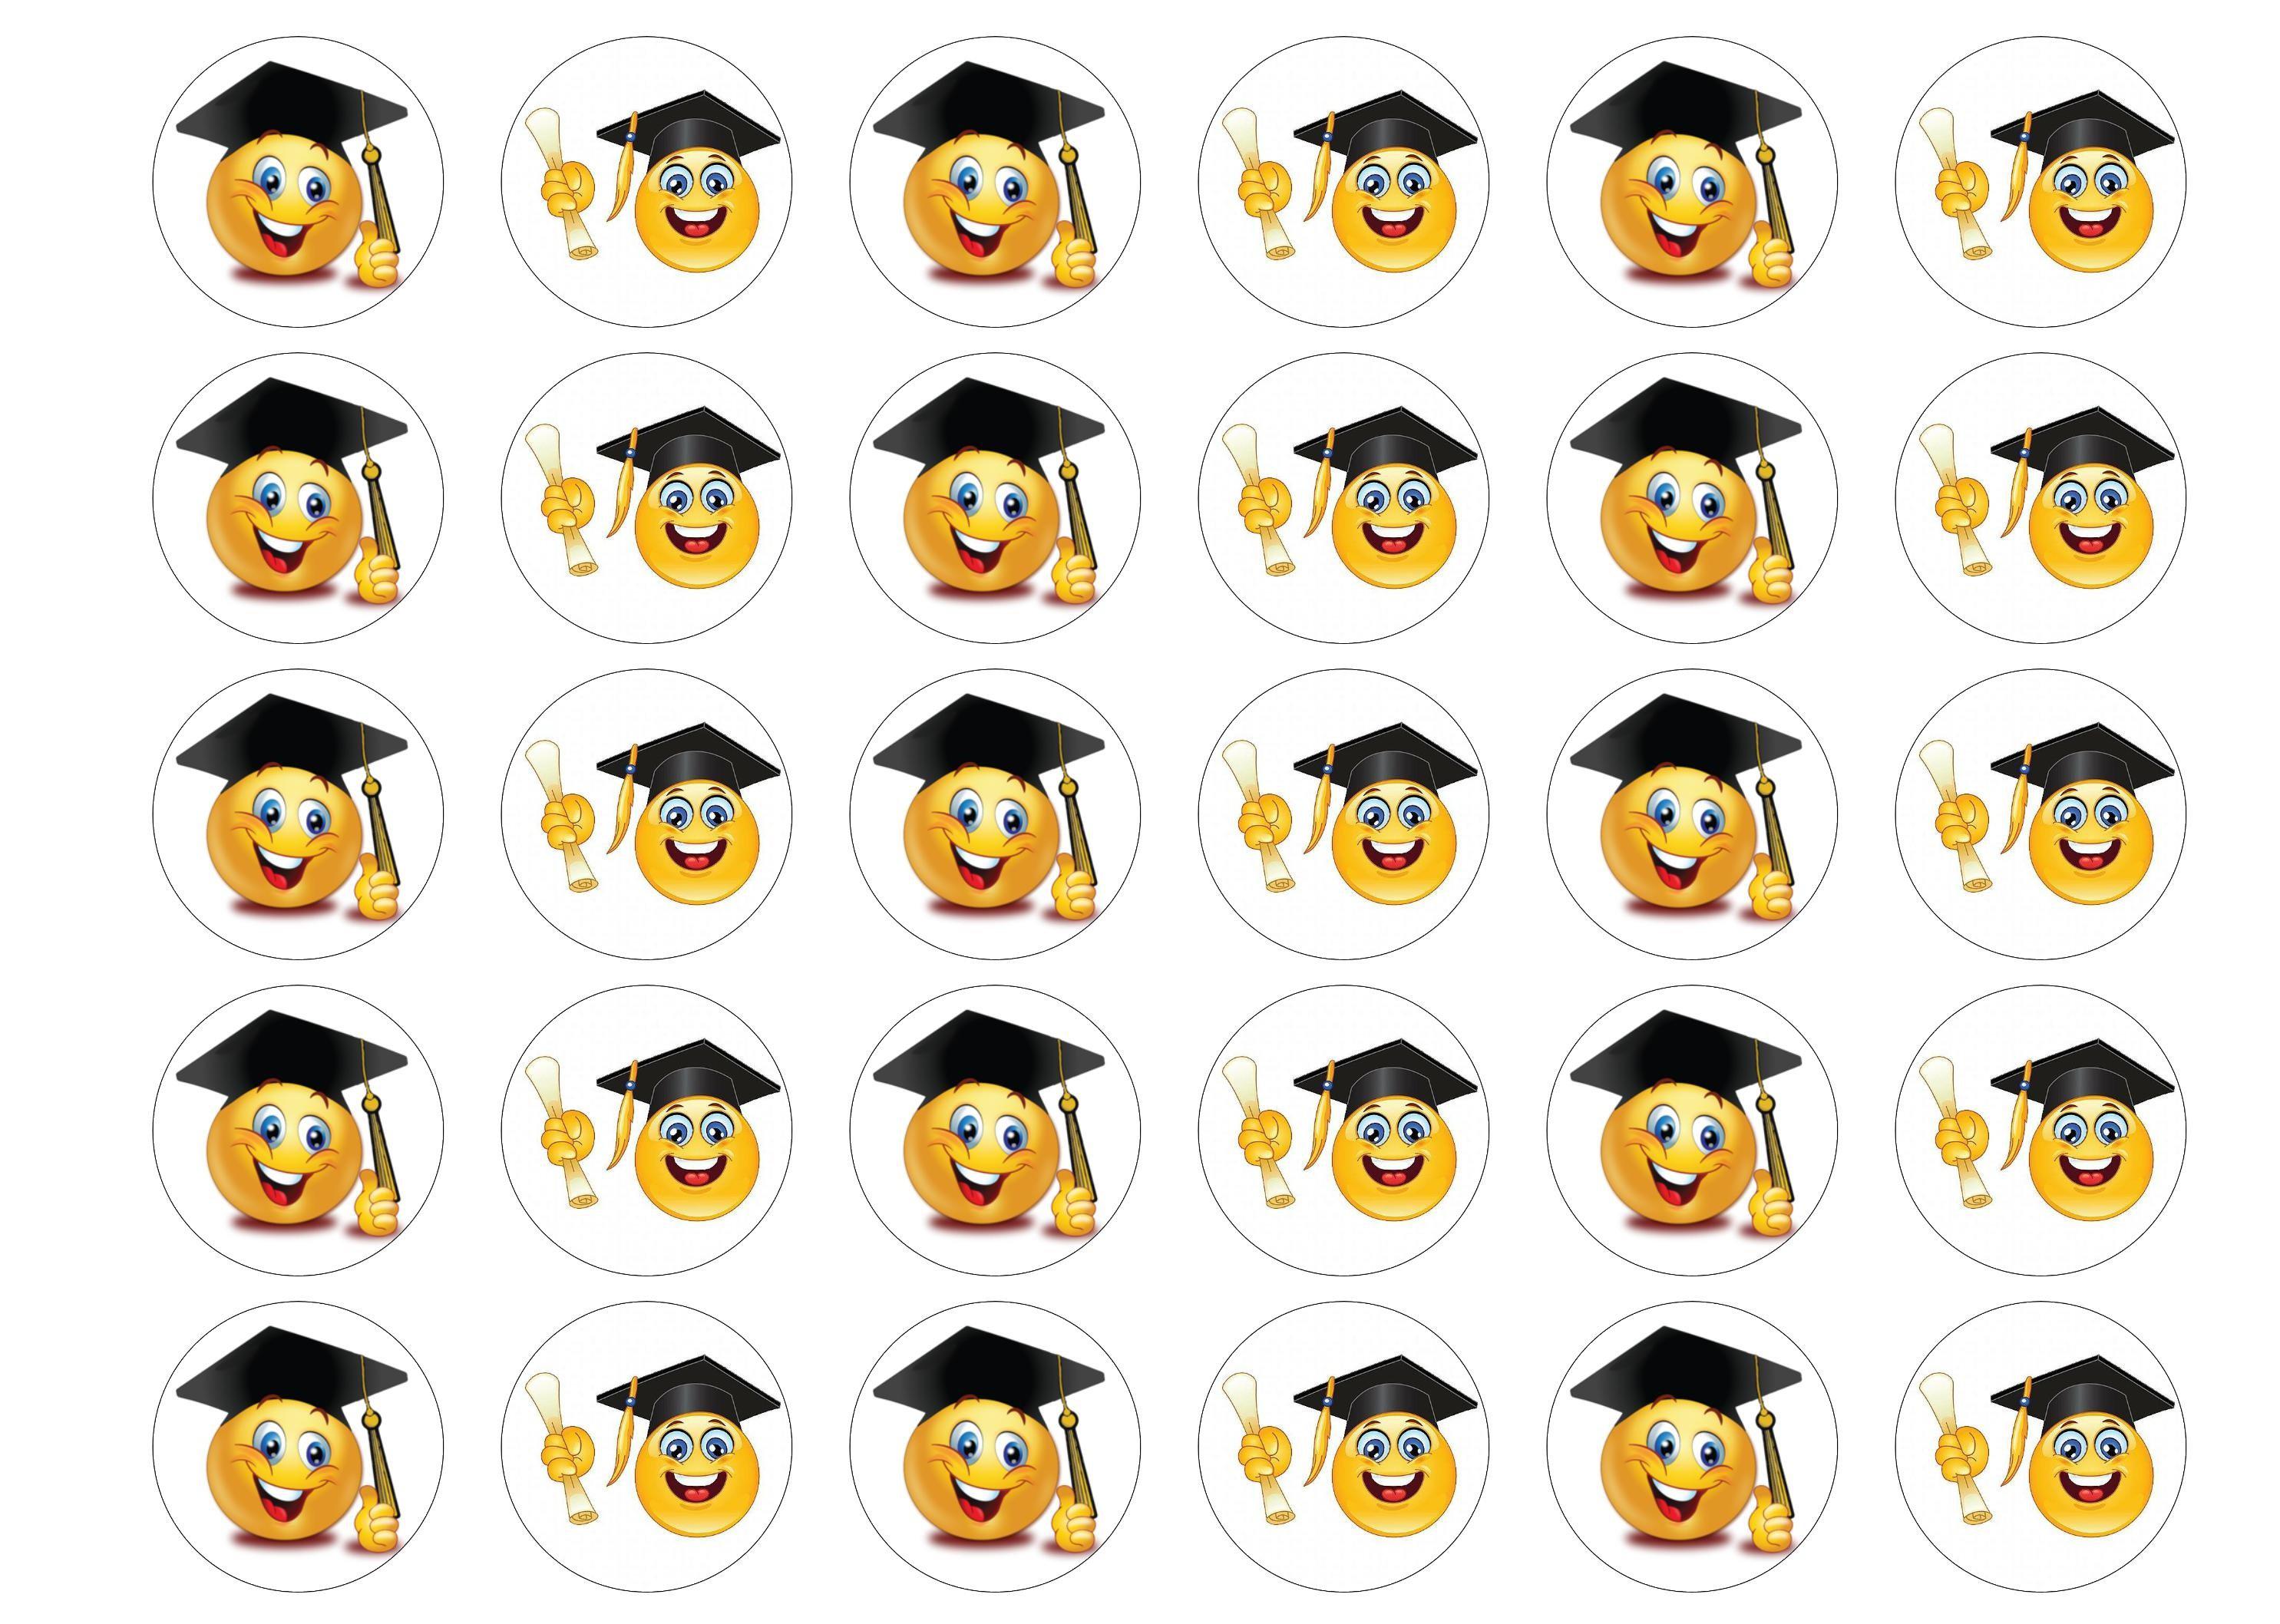 30 edible cupcake toppers with emoji images for graduation